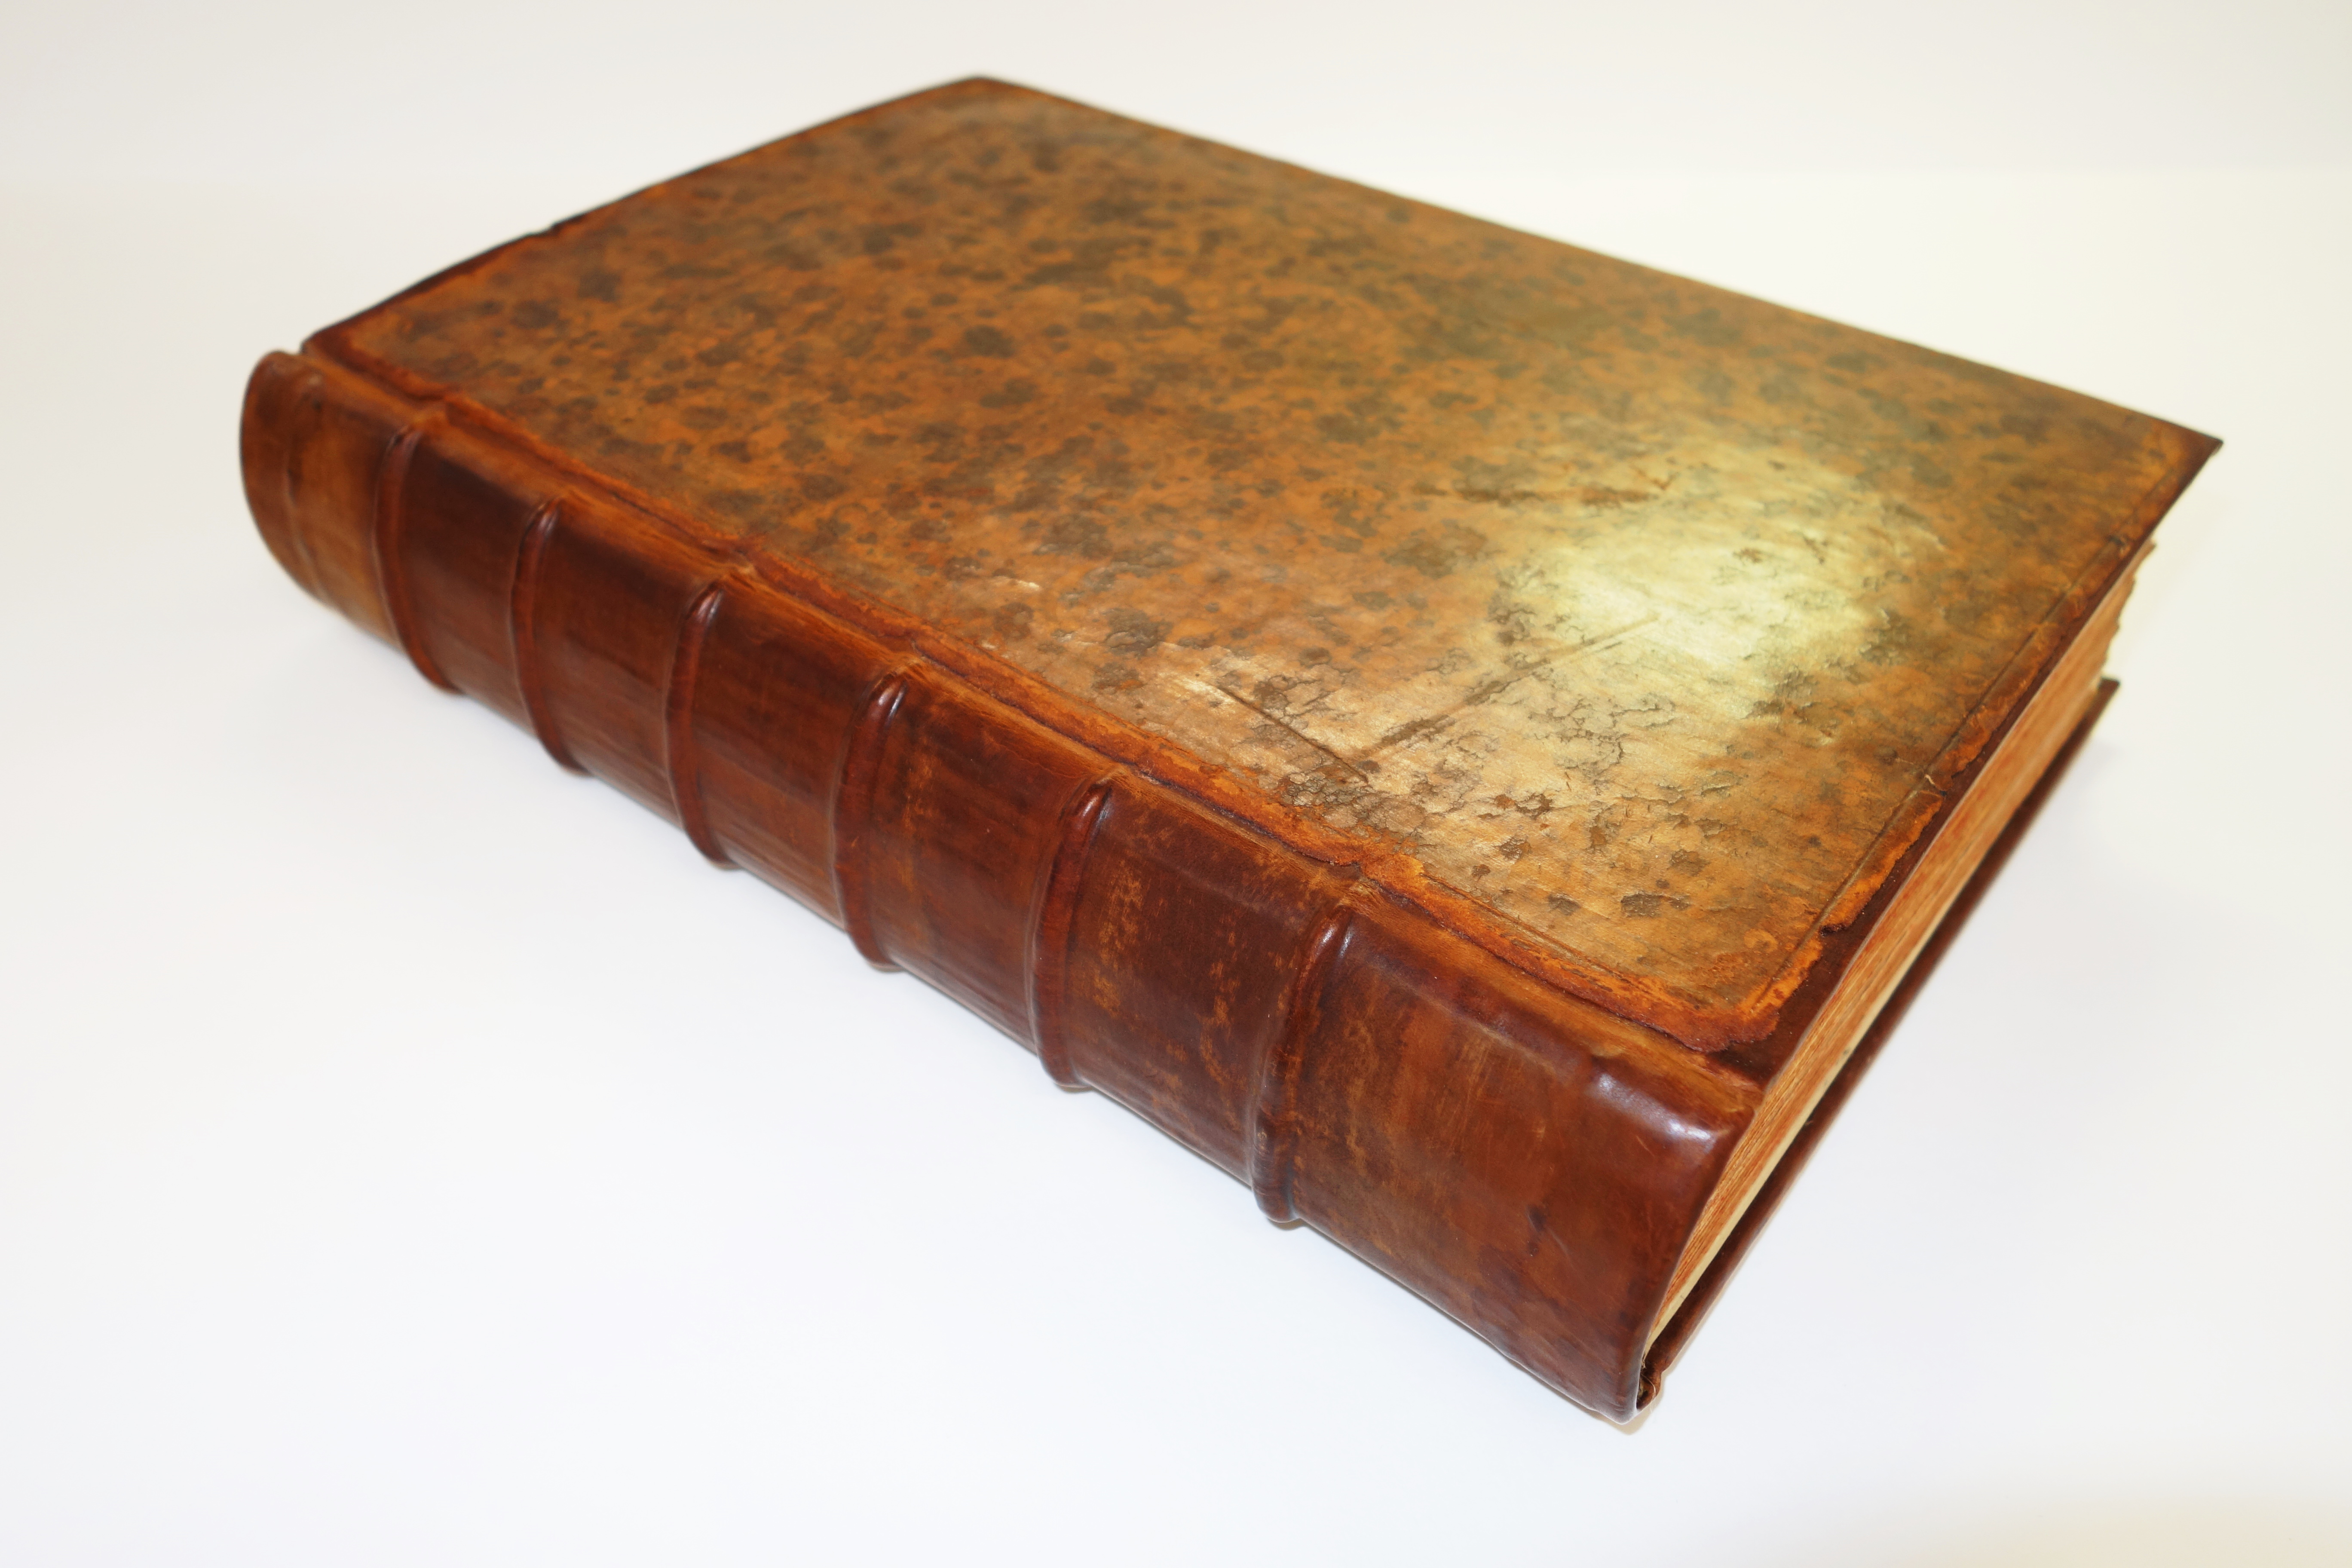 Repaired book recovered in brown leather